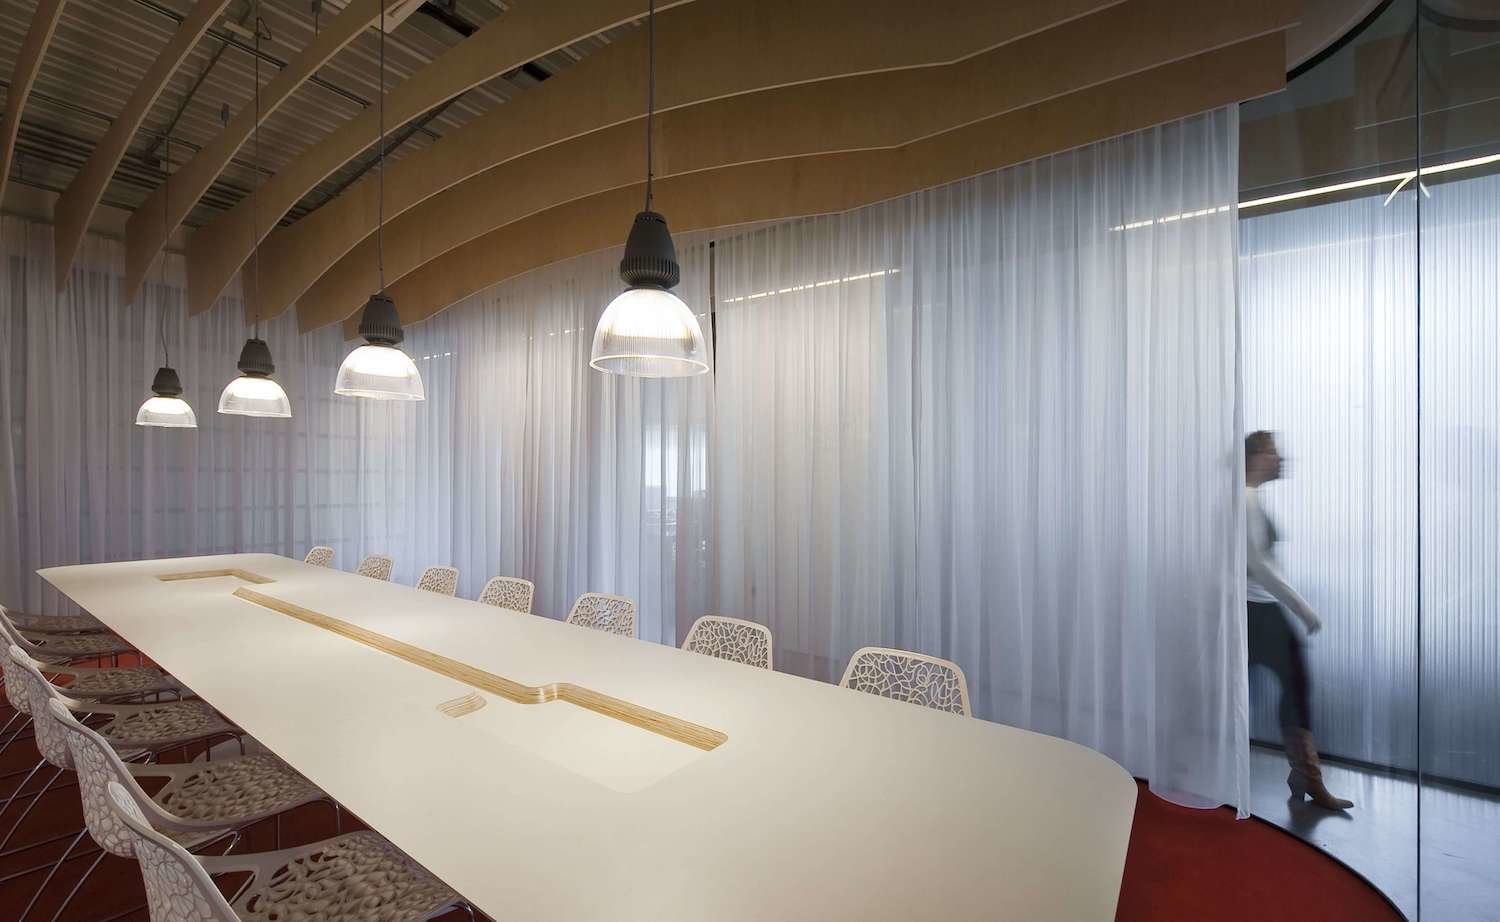 Liong Lie architects Grand Catering glass meeting room with curved wooden lamella ceiling